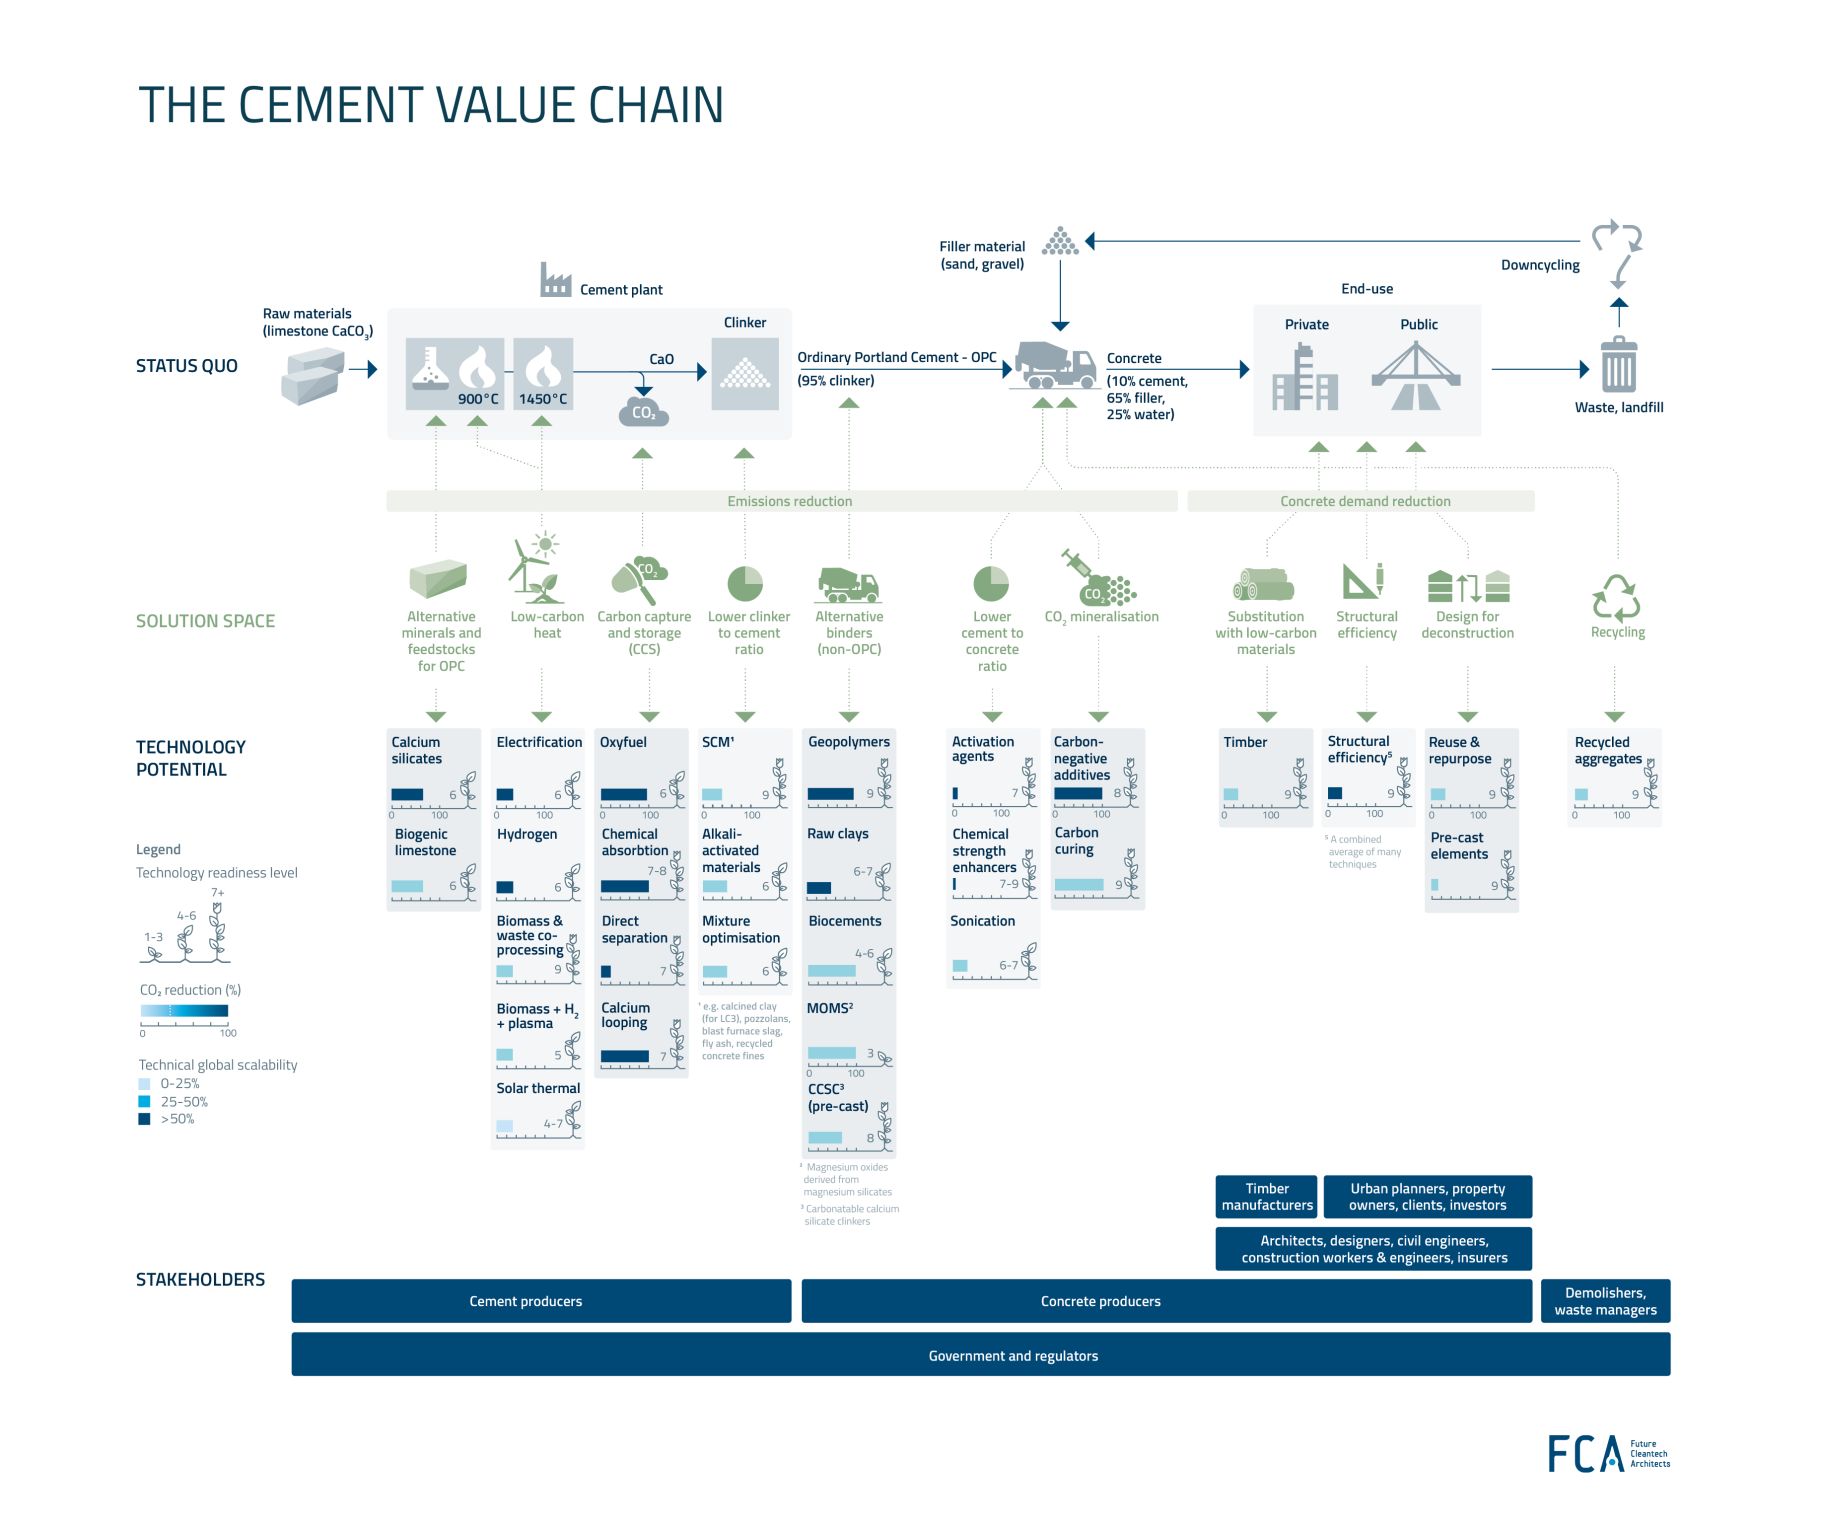 📢 New Cement Value Chain for Decarbonizing the Sector